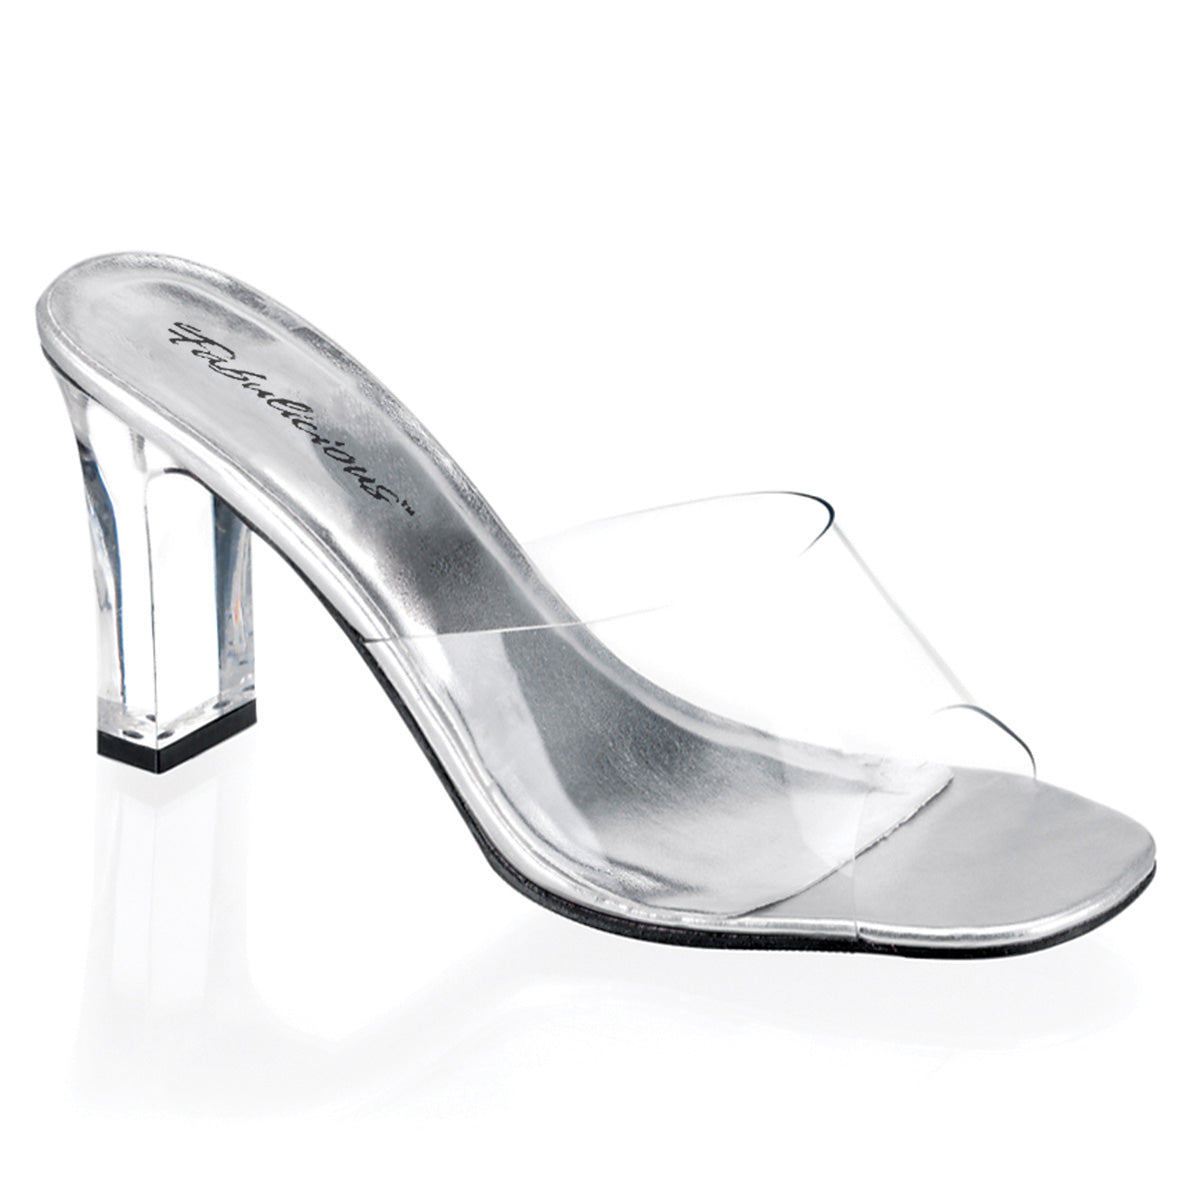 ROMANCE-301 Fabulicious 3 Inch Heel Clear Sexy Slip On Shoes